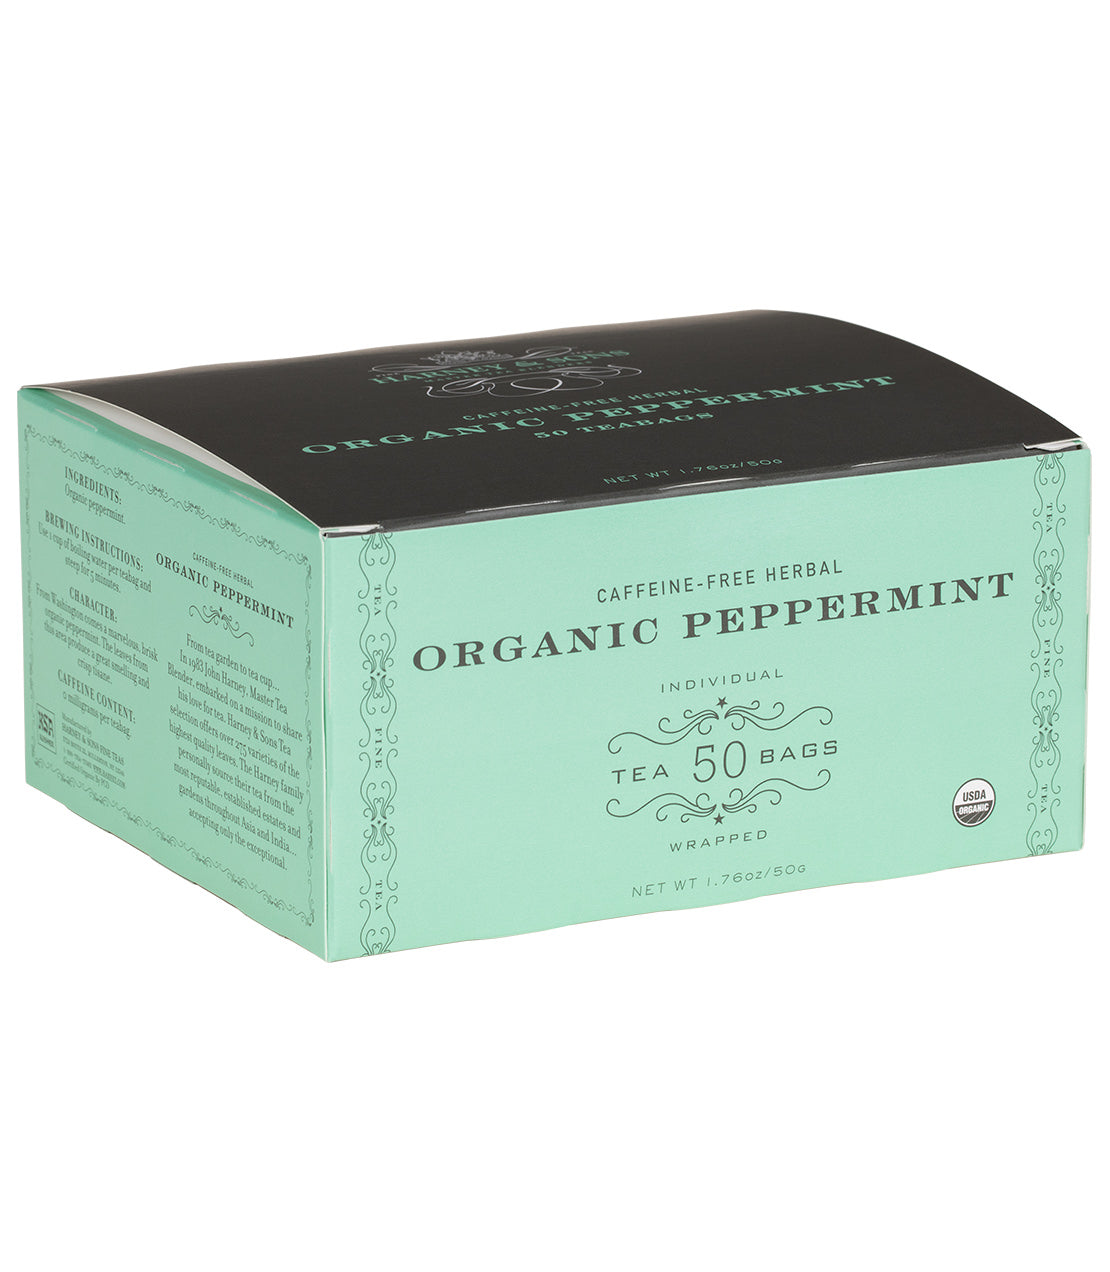 Organic Peppermint - Teabags 50 CT Foil Wrapped Teabags - Harney & Sons Fine Teas